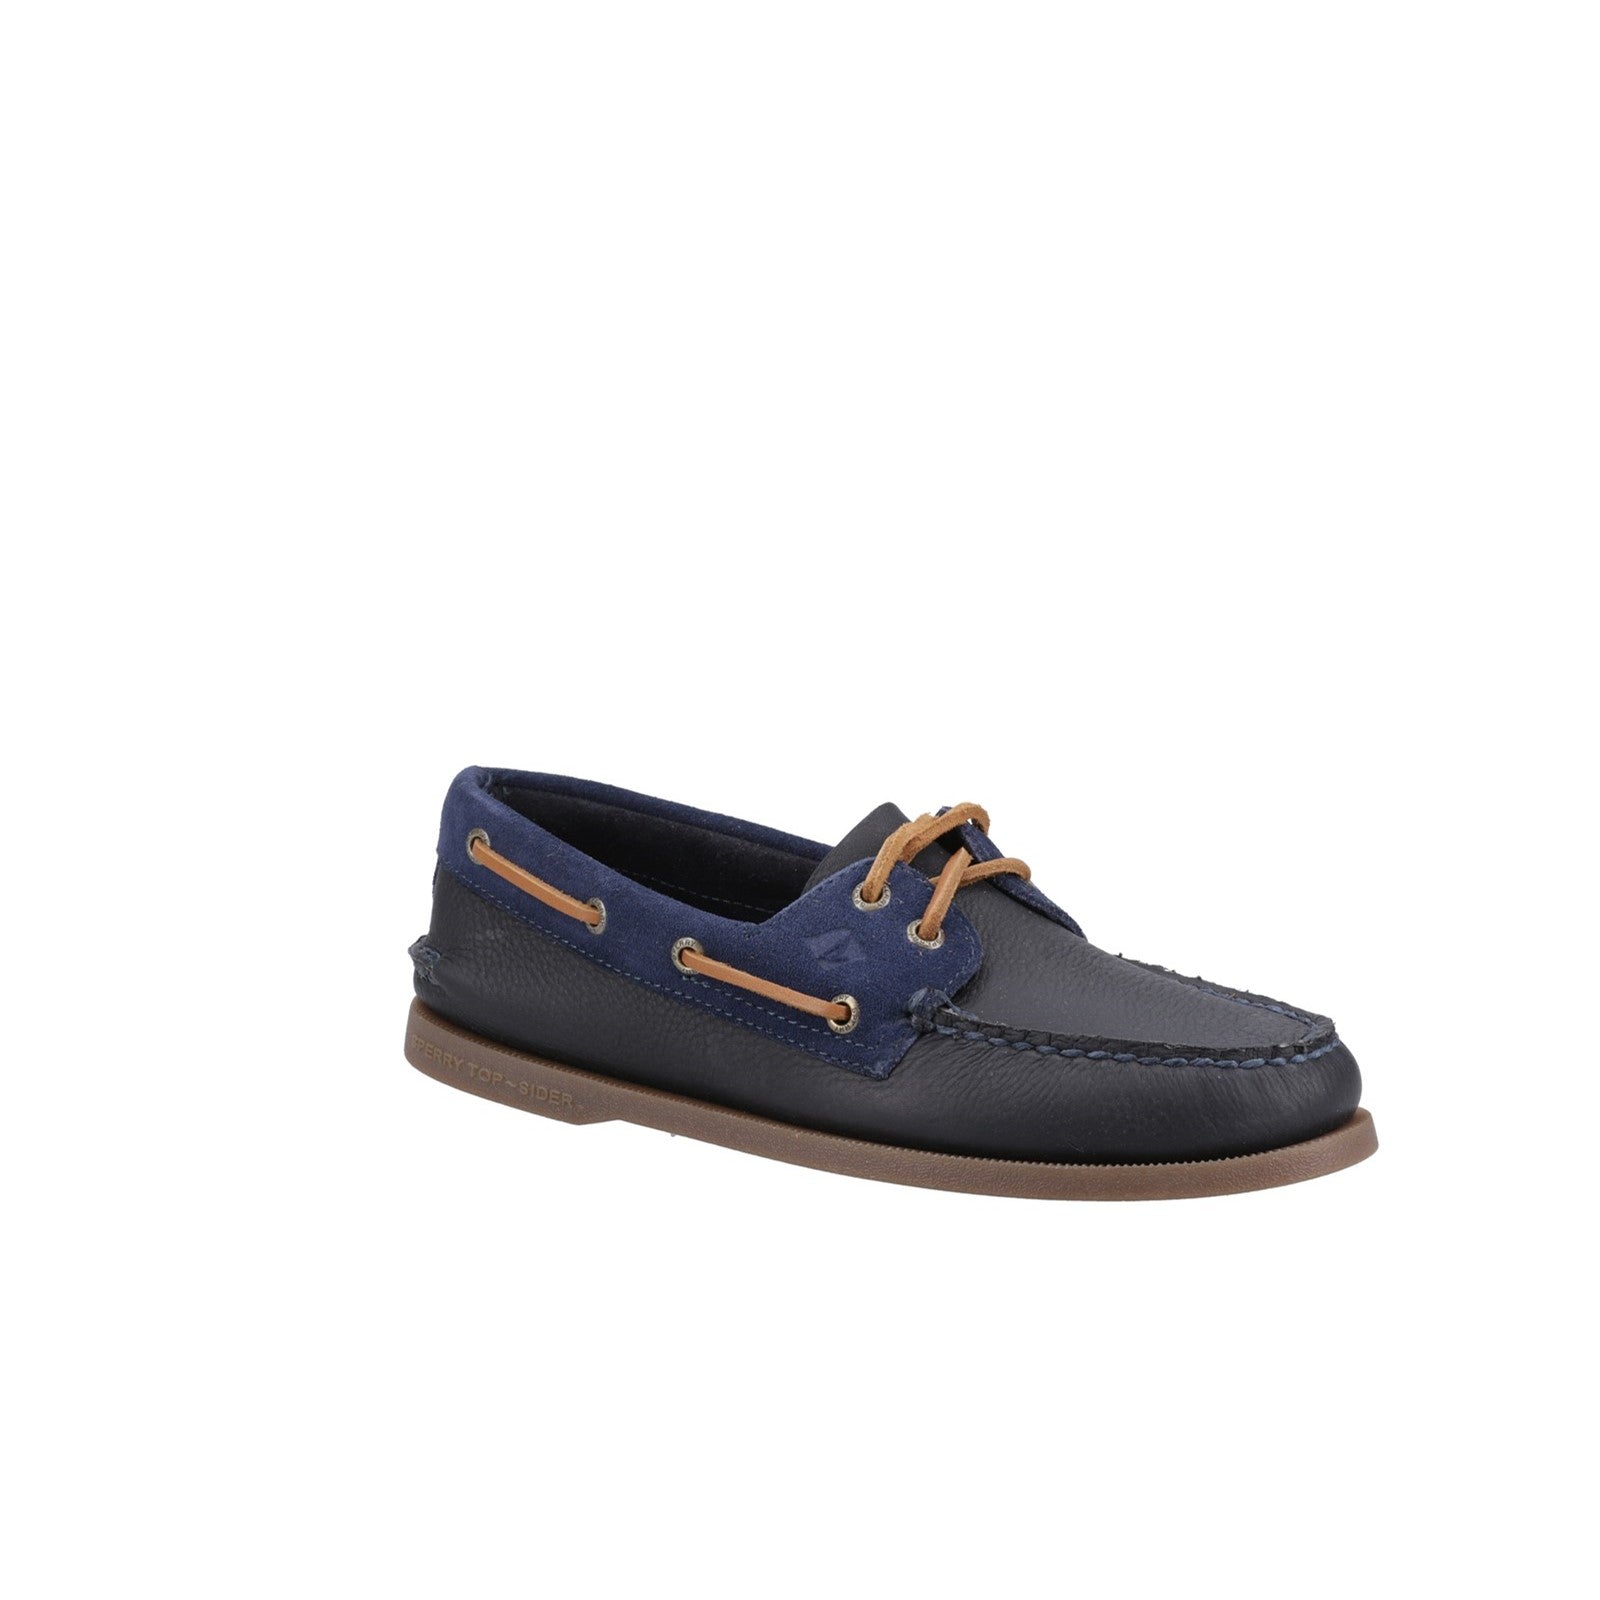 Sperry Top-sider Authentic Original Tumbled Suede Boat Shoe